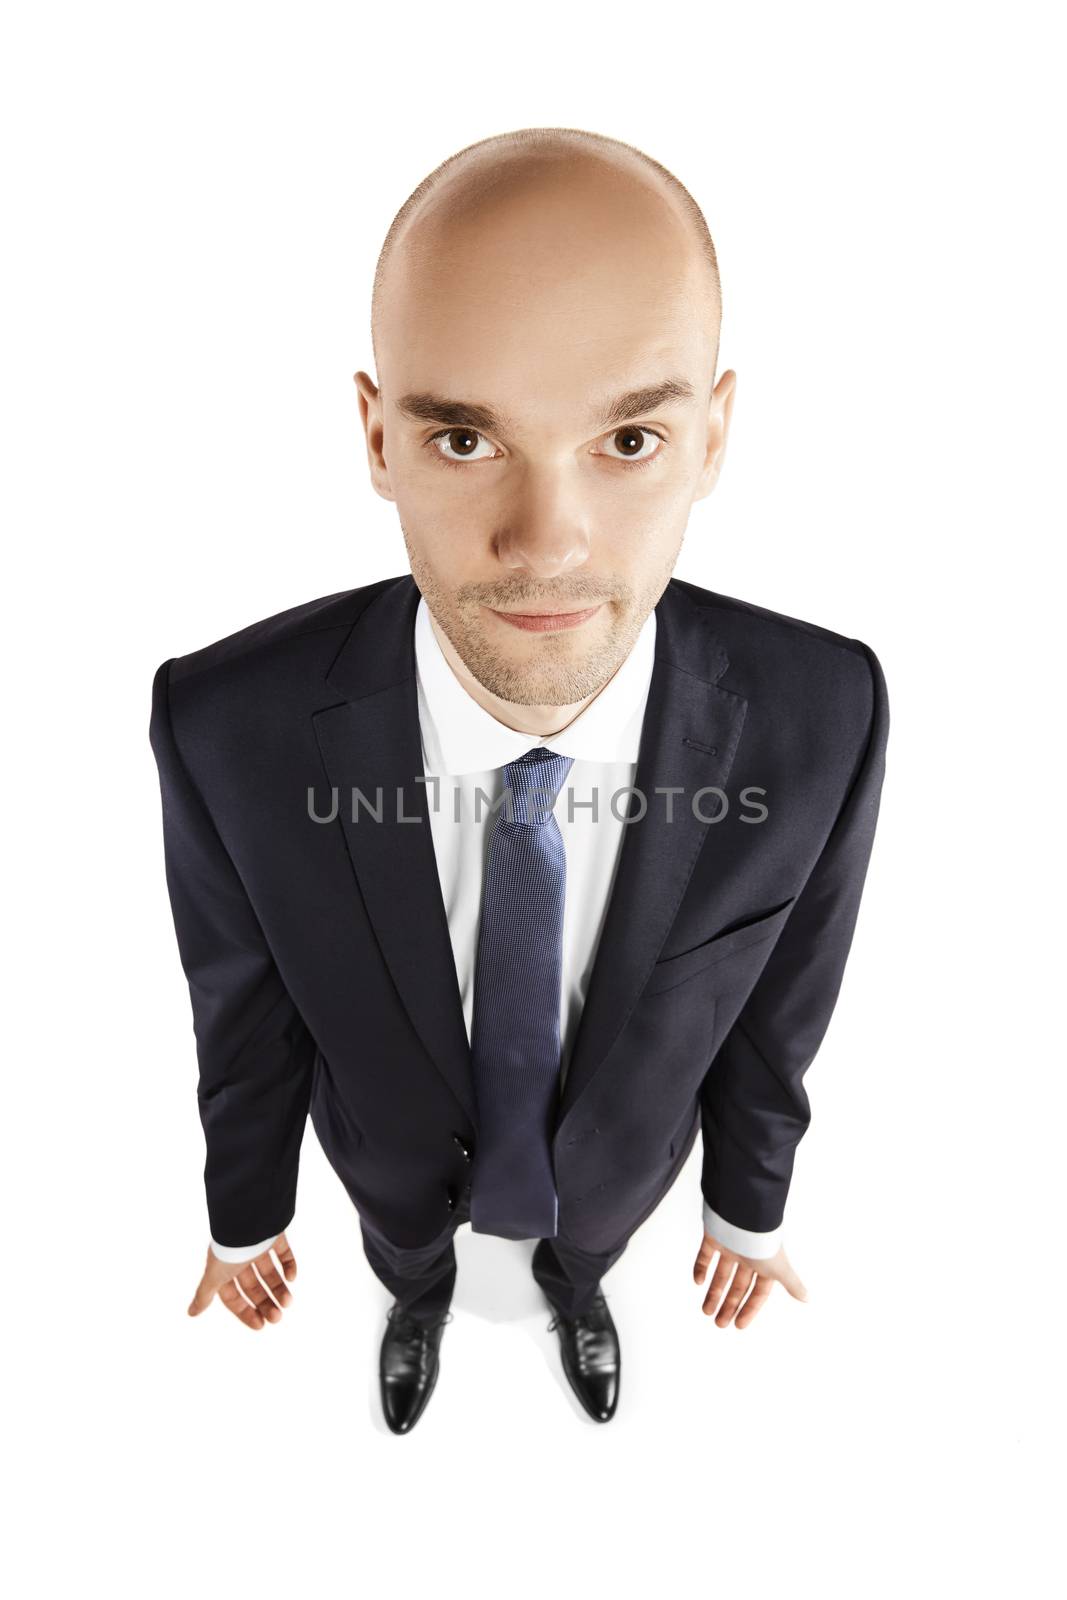 Overhead view of a young man looking up. Studio shot isolated on white background.